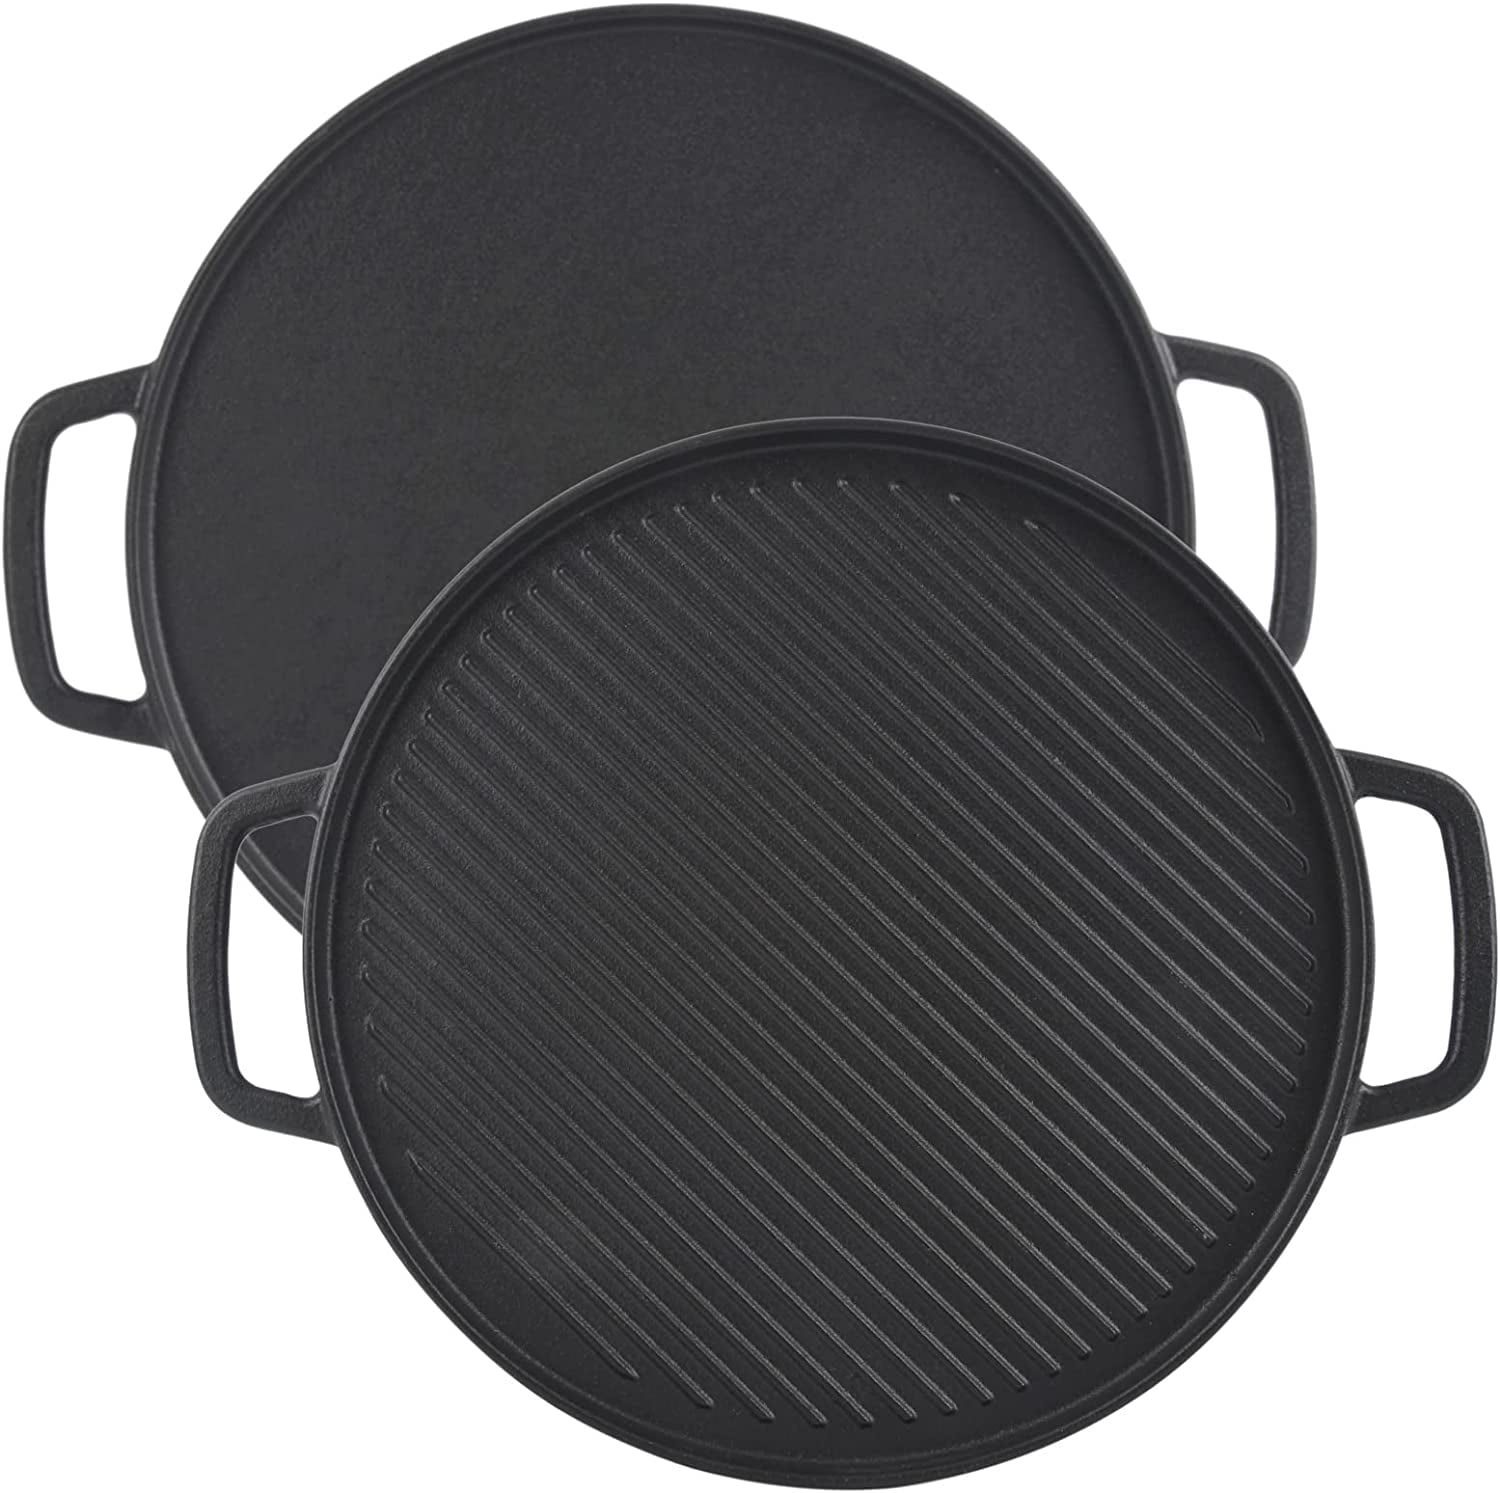 Small Grooved Cast Iron Griddle Ferraboli the Grill Pan for Home Use